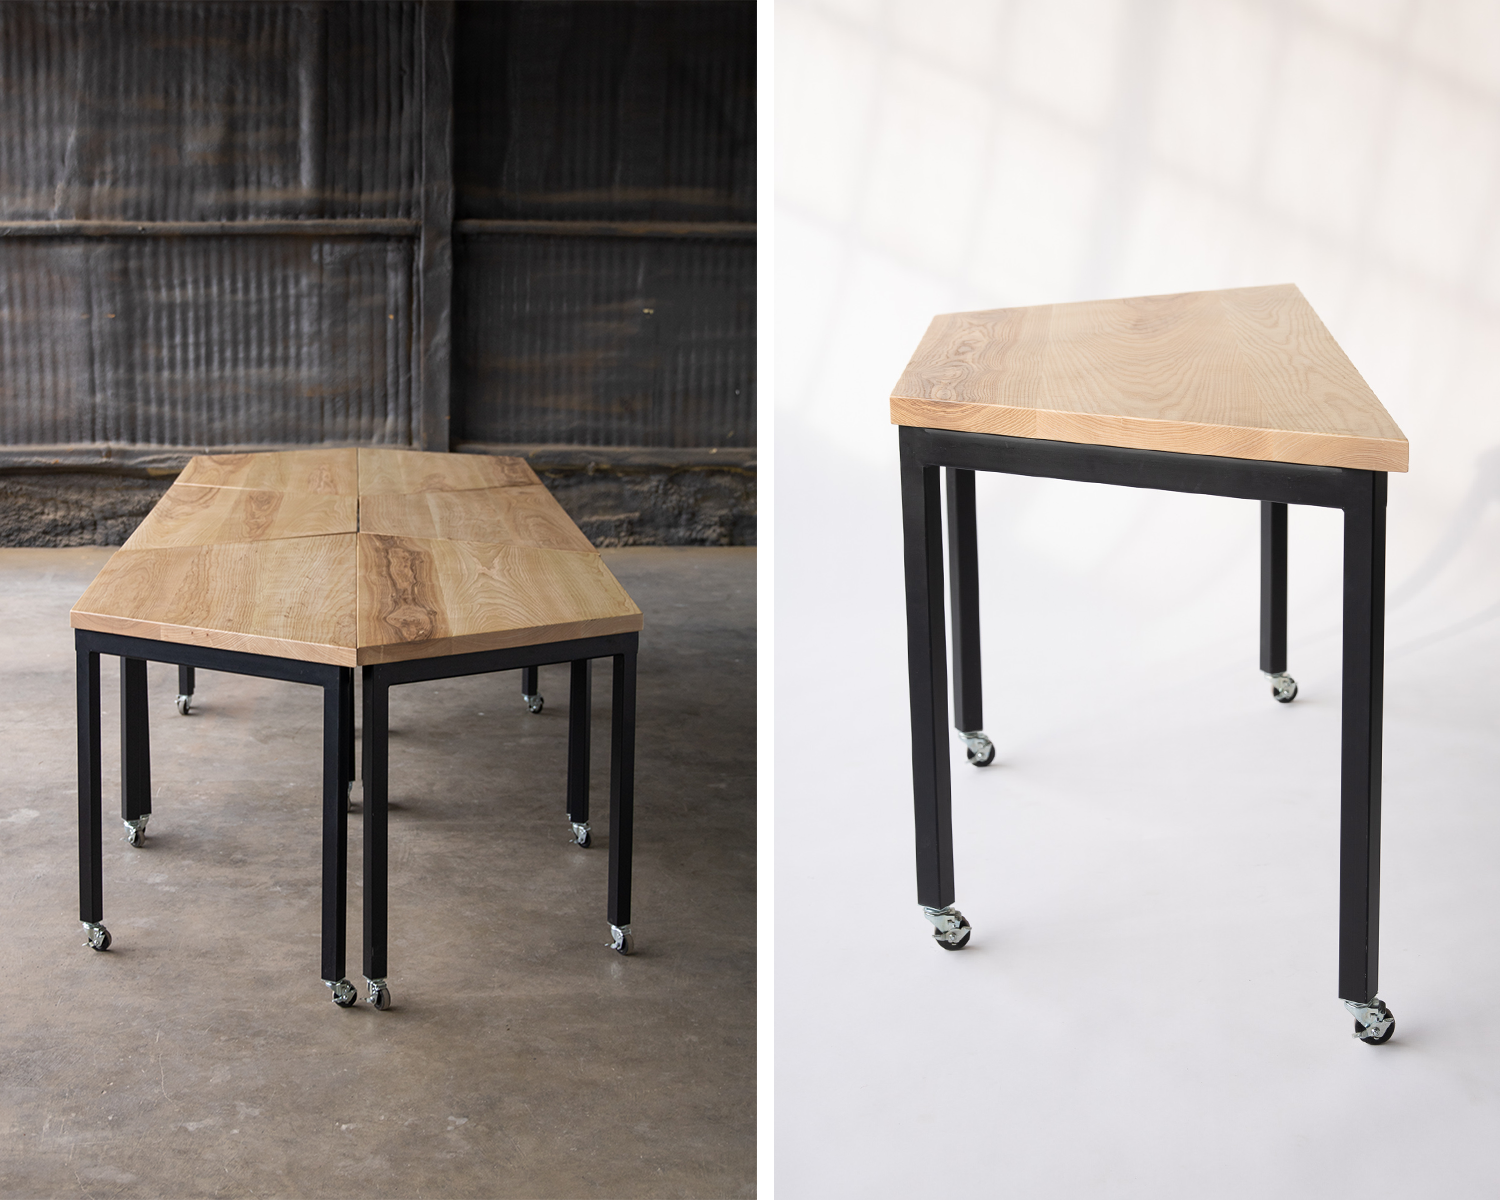 HIVE Table - Modular Event Tables by Edgework Creative